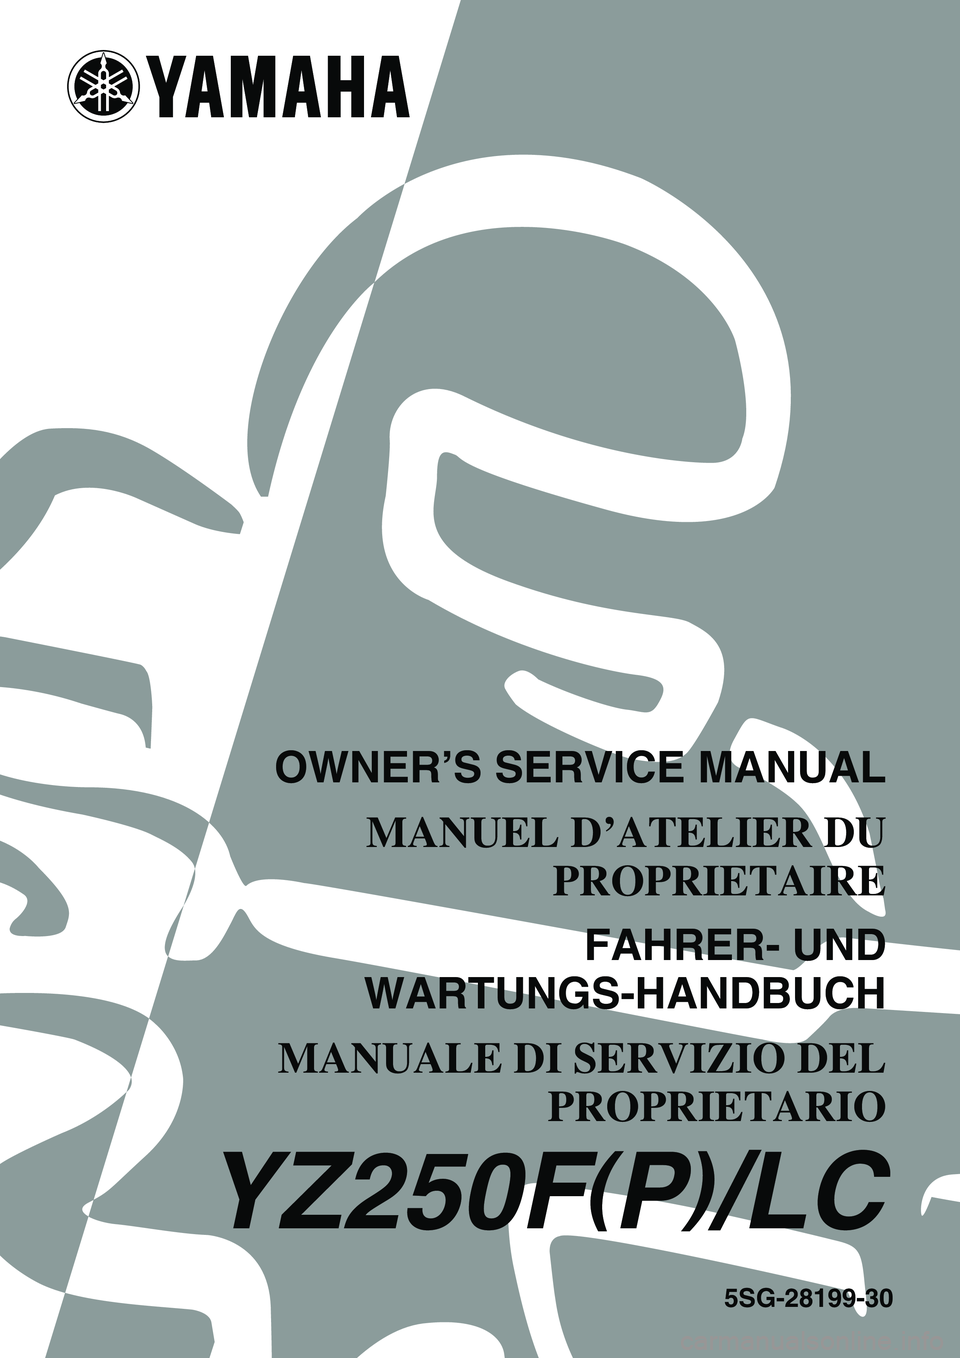 YAMAHA YZ250F 2002  Notices Demploi (in French) 5SG-28199-30
YZ250F(P)/LC
OWNER’S SERVICE MANUAL
MANUEL D’ATELIER DU
PROPRIETAIRE
FAHRER- UND
WARTUNGS-HANDBUCH
MANUALE DI SERVIZIO DEL
PROPRIETARIO 